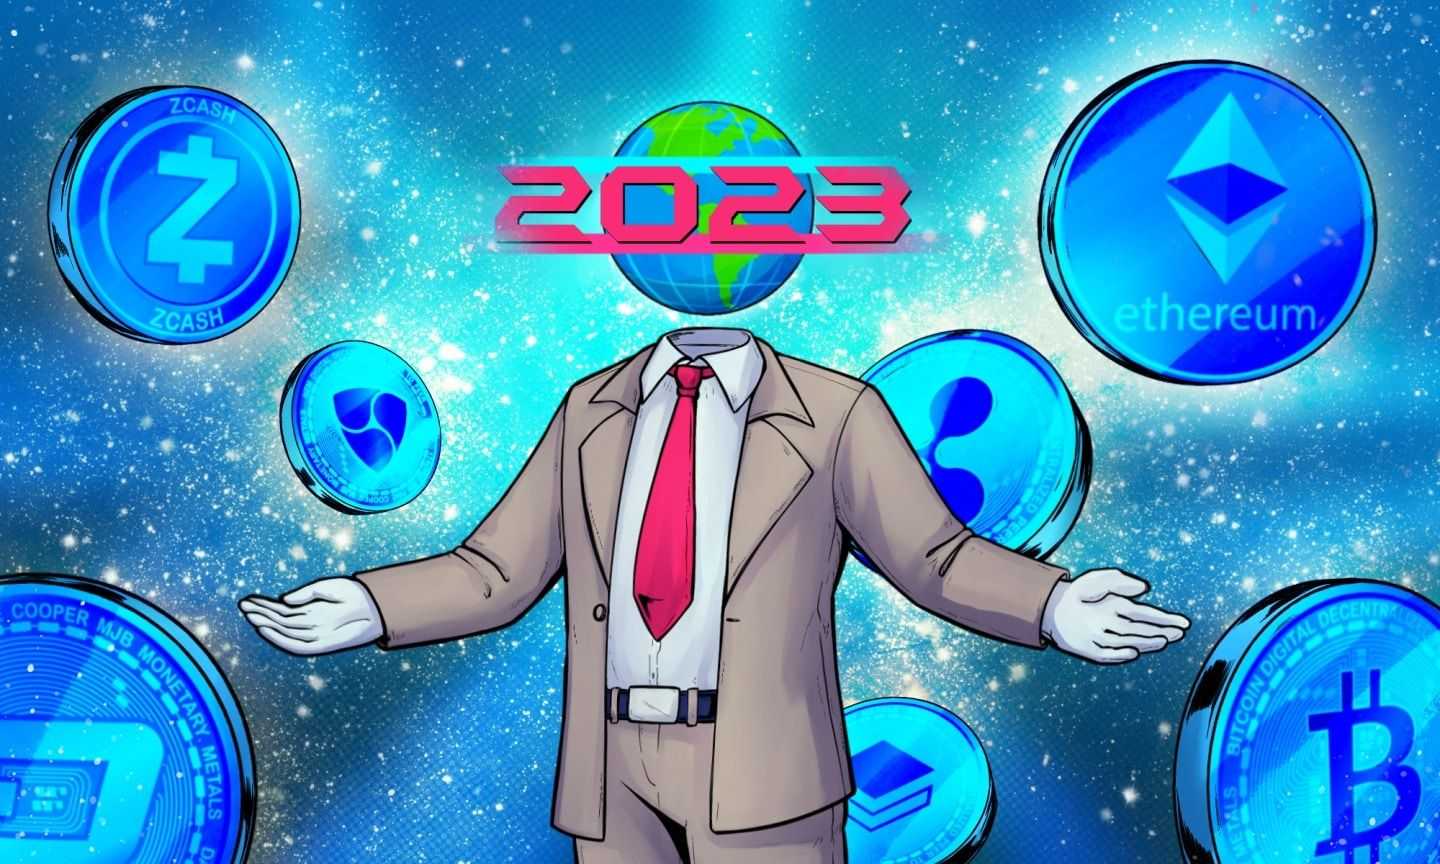 Top investments 2023|Investing in Cryptocurrencies